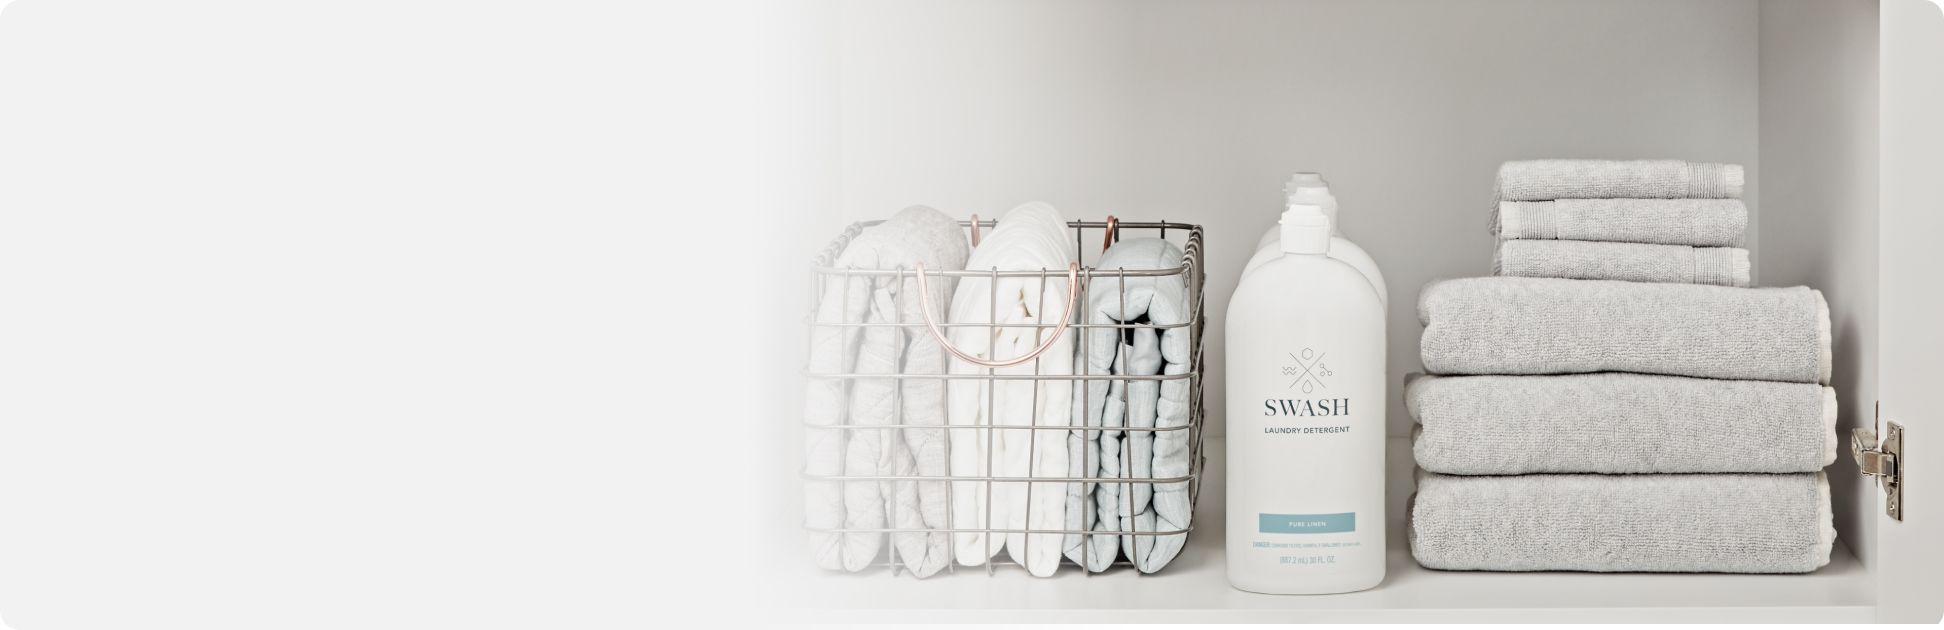 A bottle of Swash® Laundry Detergent next to folded towels.